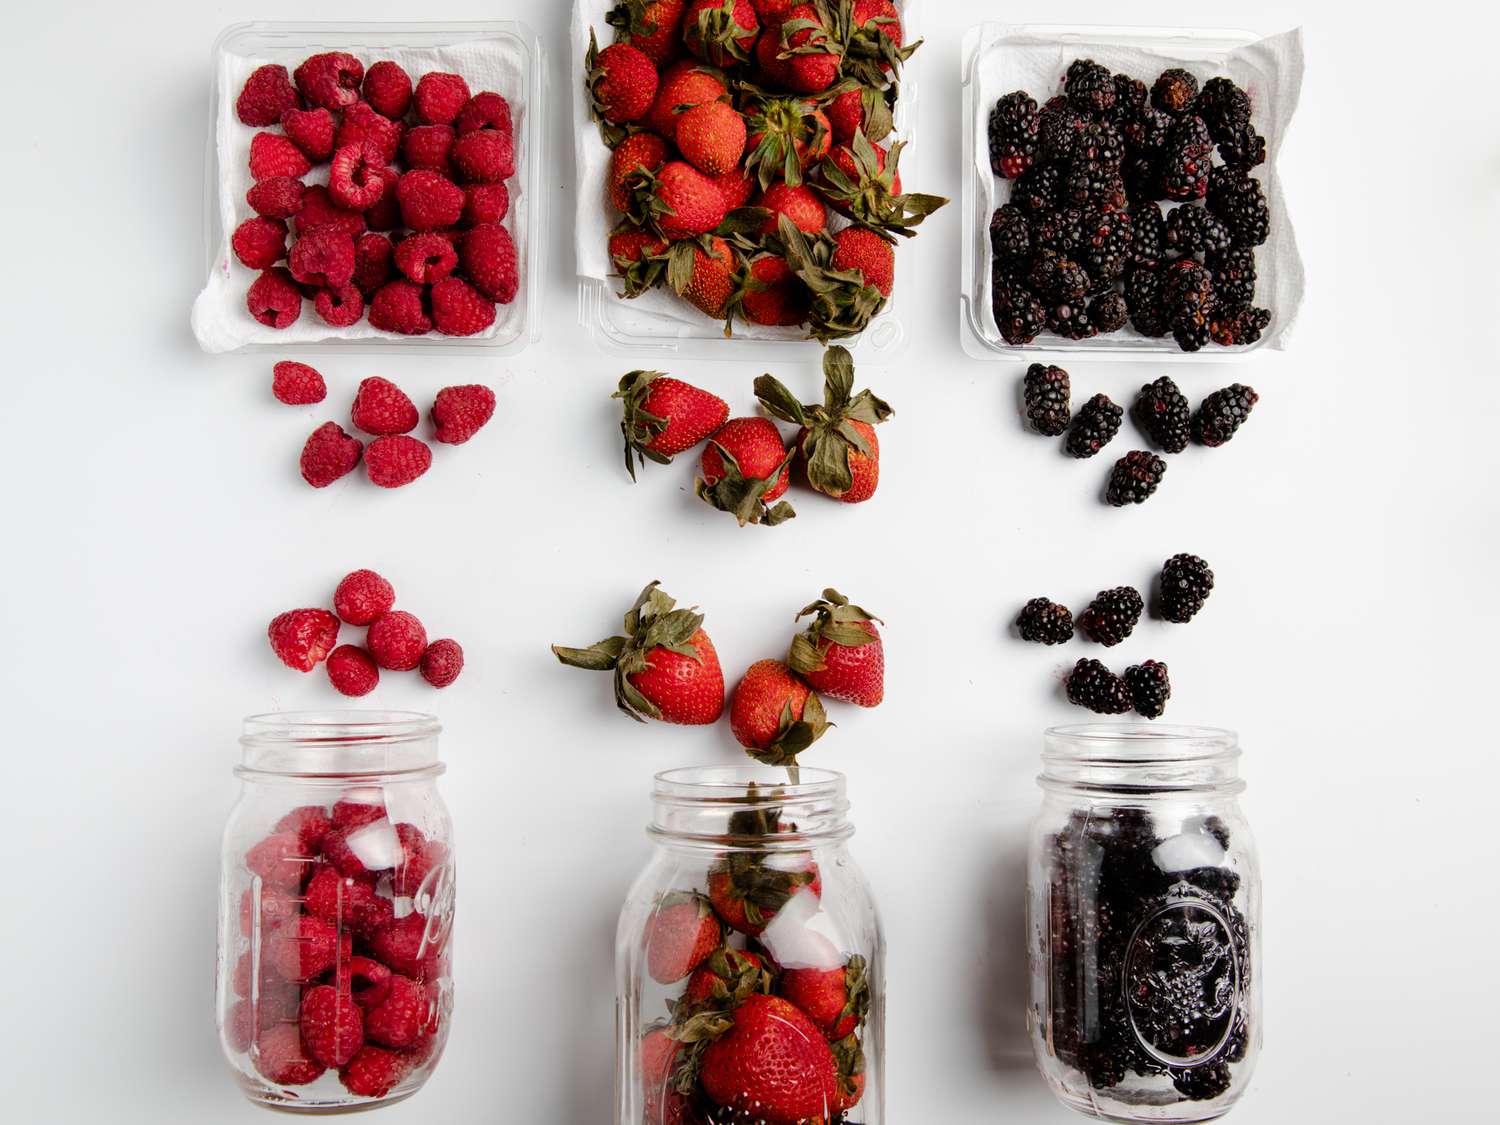 How To Store Berries To Last Longer